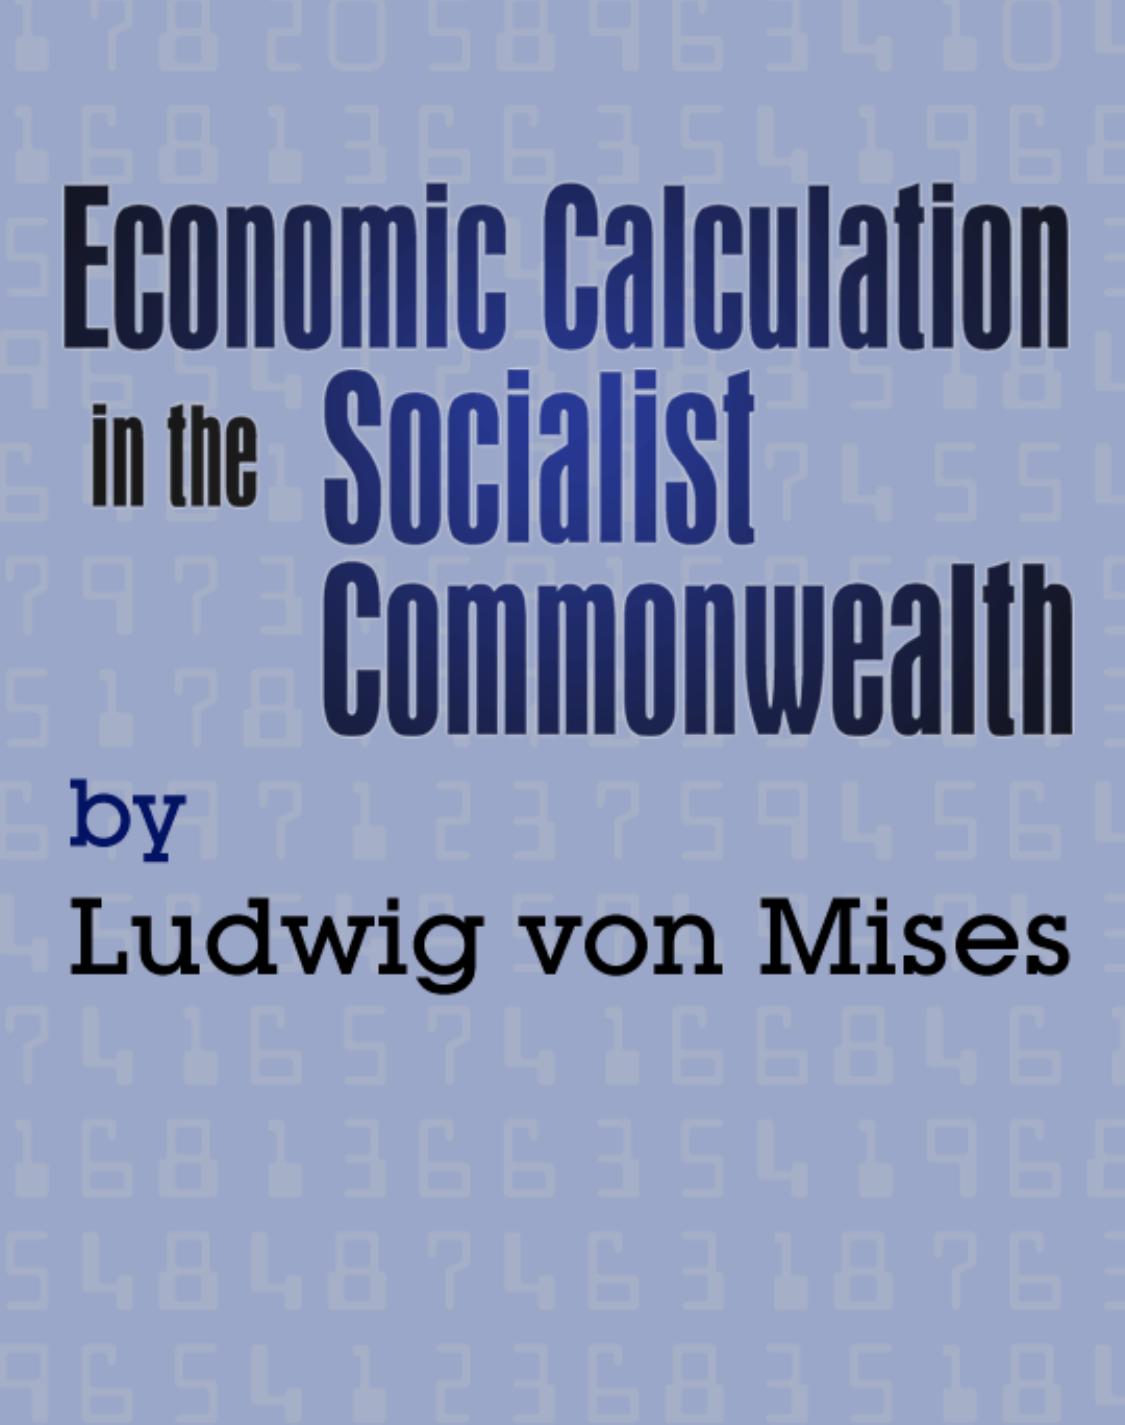 Economic Calculation in the Socialist Commonwealth by Ludwig von Mises